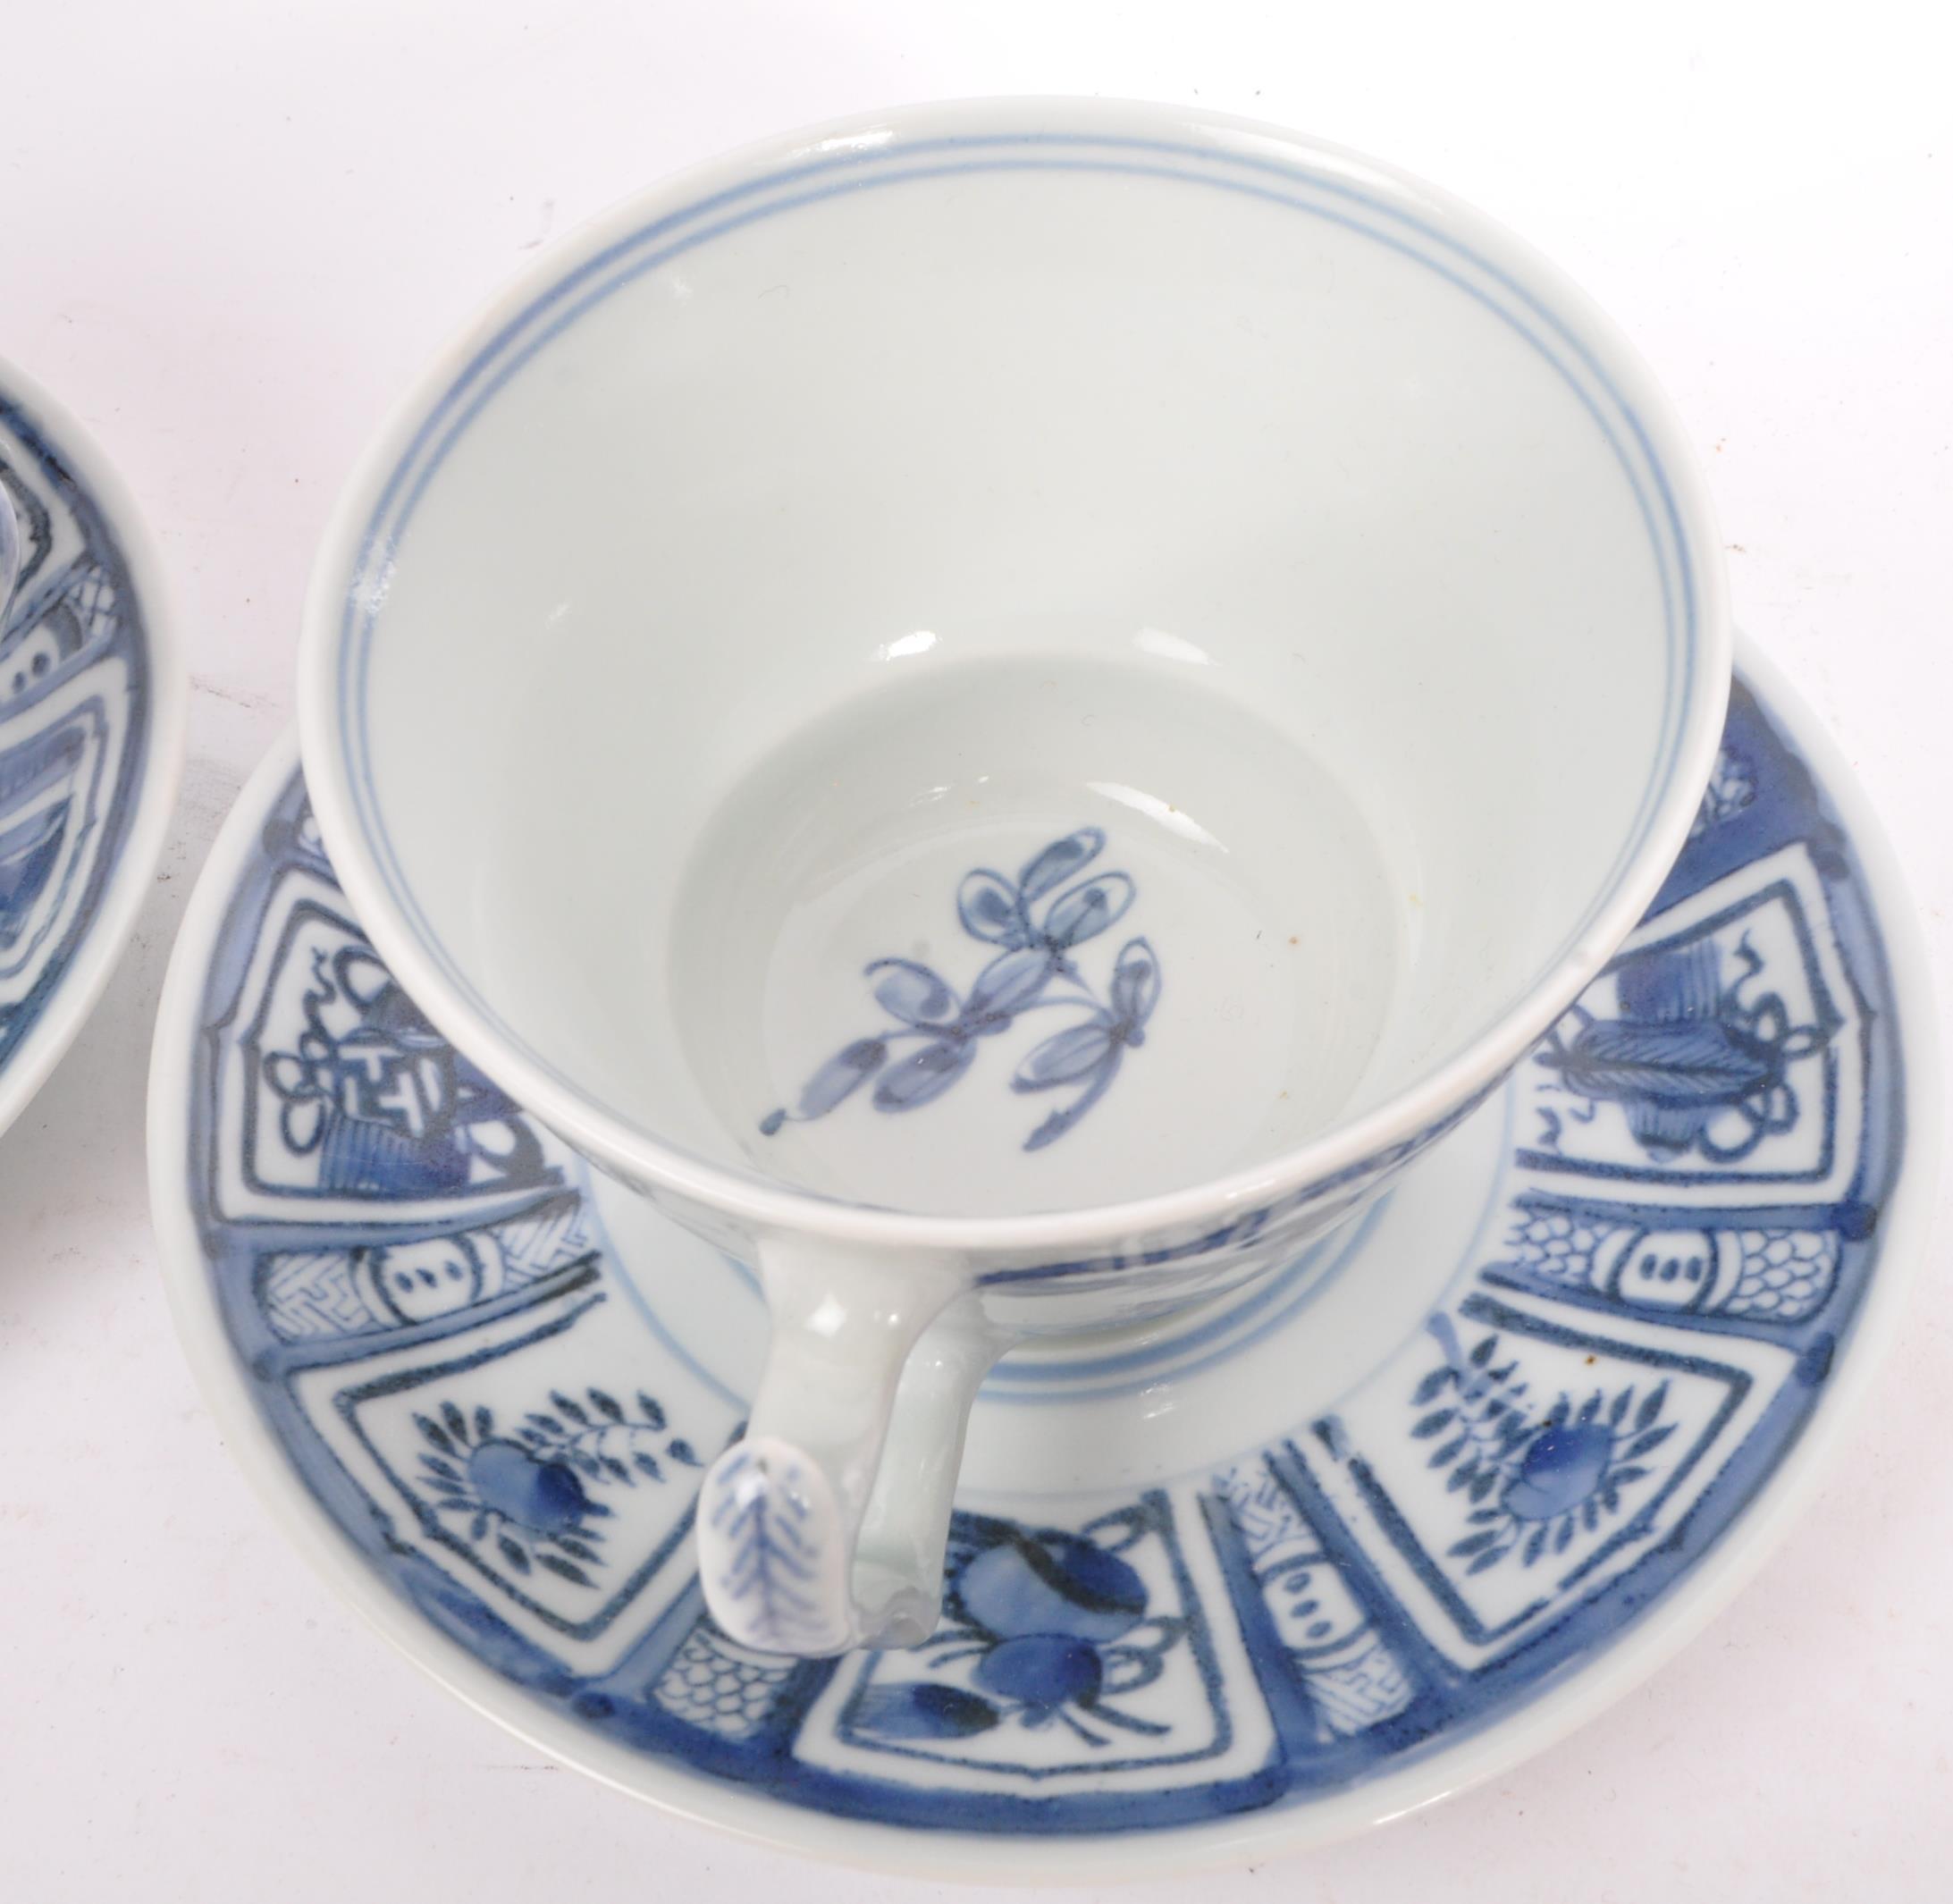 EARLY 20TH CENTURY CHINESE PORCELAIN TEA SERVICE - Image 8 of 9